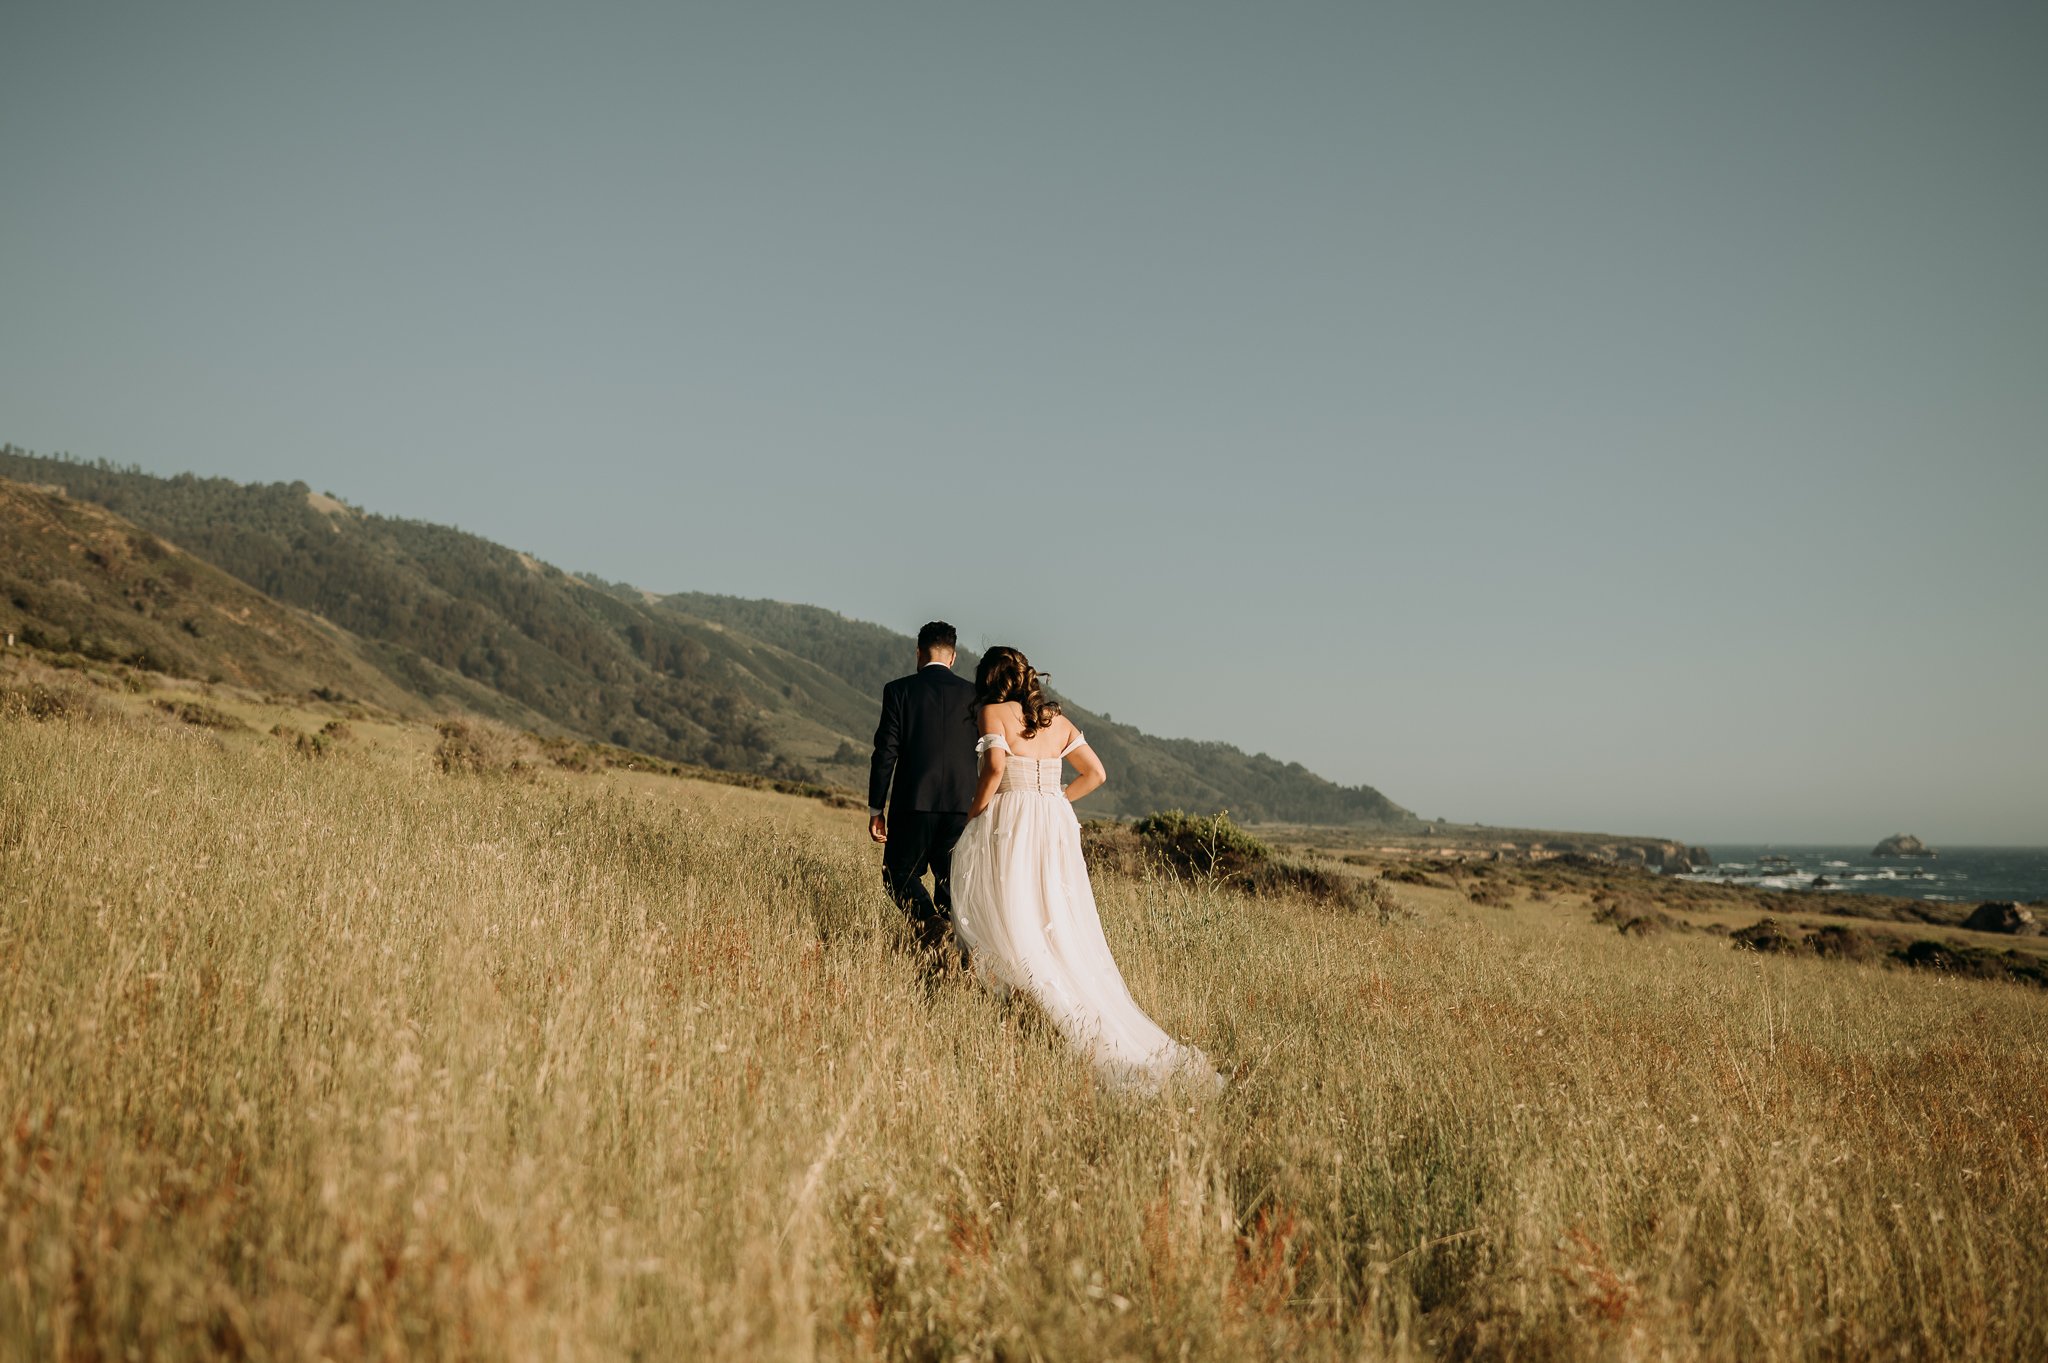 Newly married couple in wedding dress and suit in meadow in Big Sur